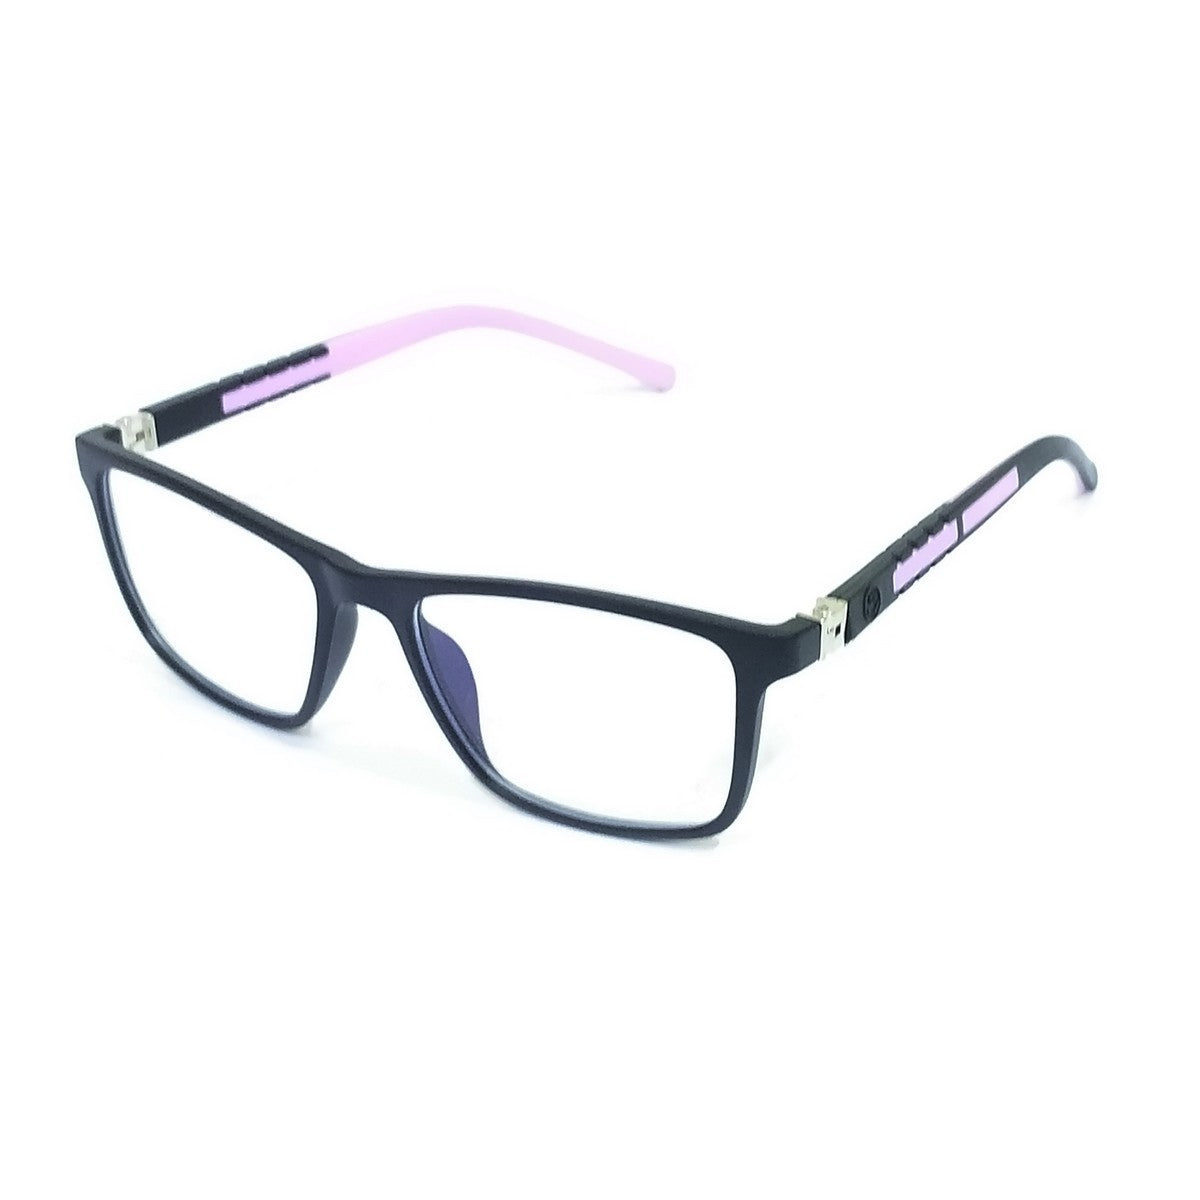 Pink Perfection: Square Black & Pink Glasses - Ideal Blue Light Defense for  6-10-Year-Old Girls